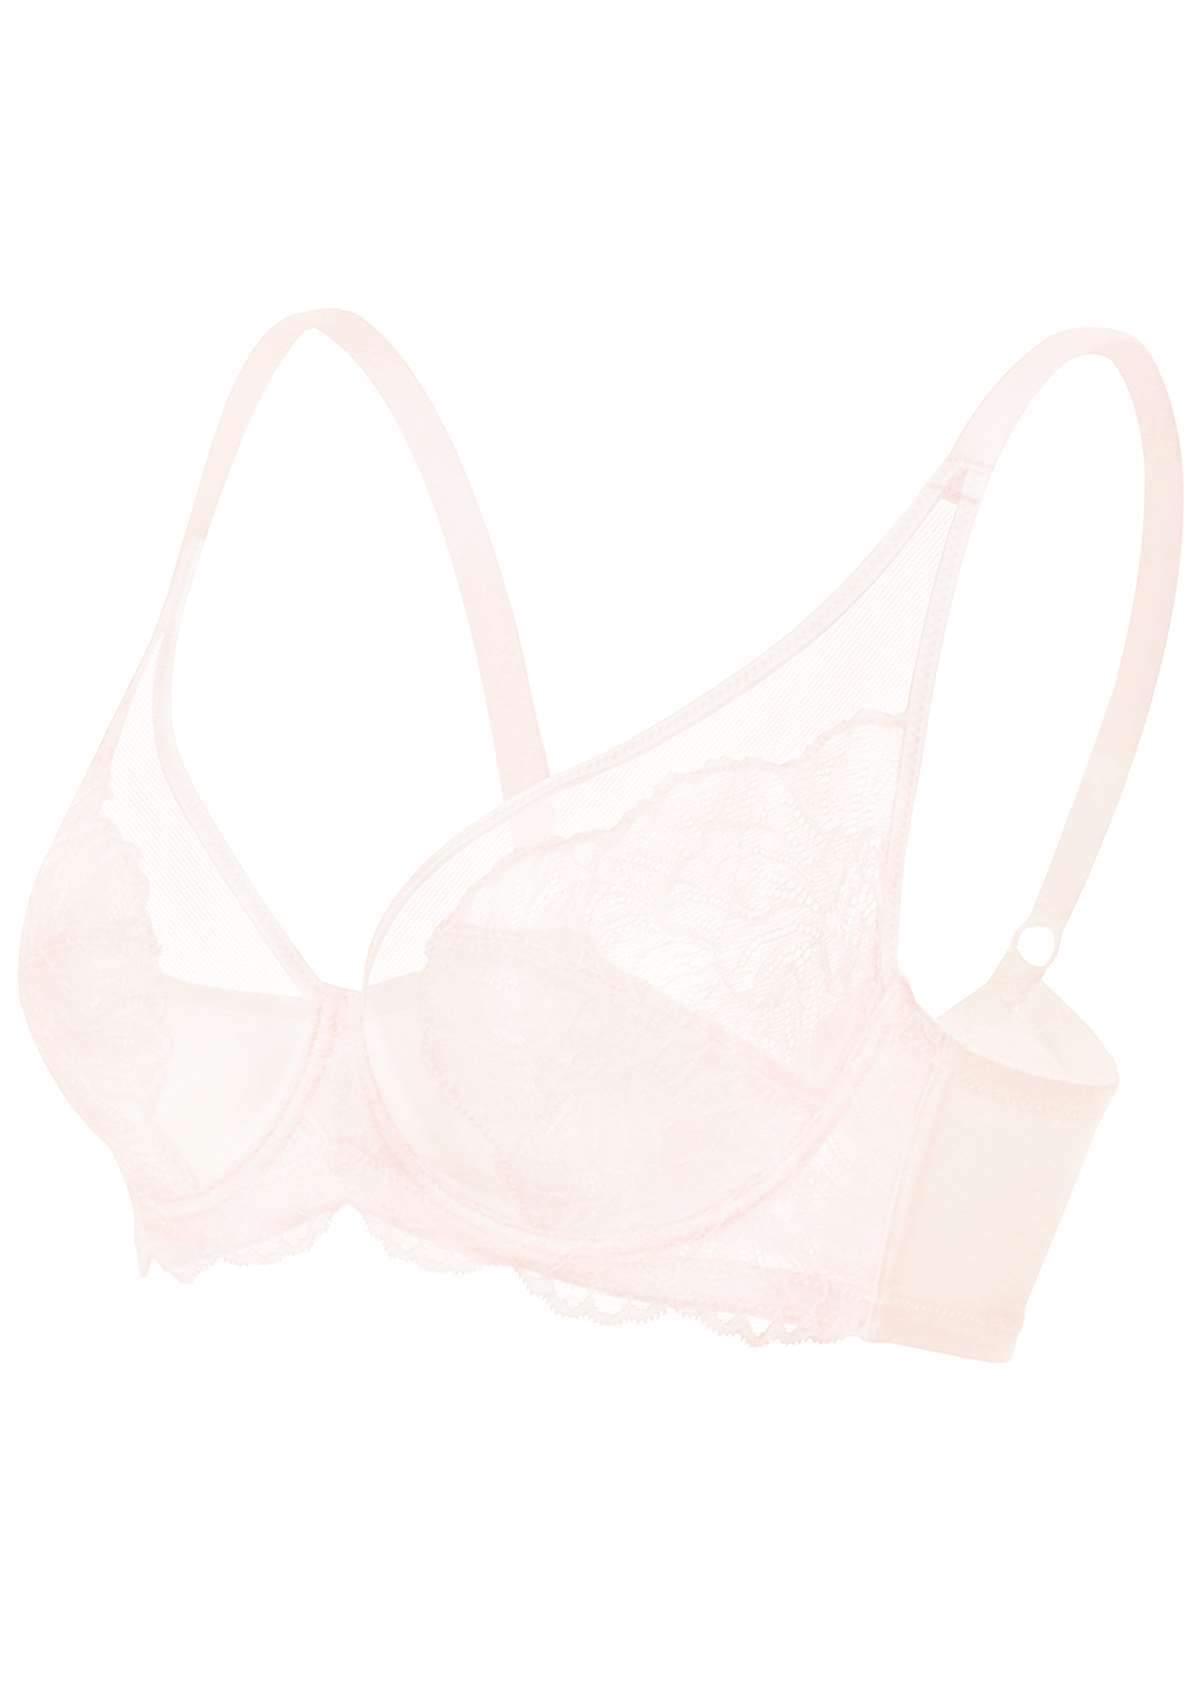 HSIA Blossom Matching Lacey Underwear And Bra Set: Sexy Lace Bra - Dusty Peach / 36 / C